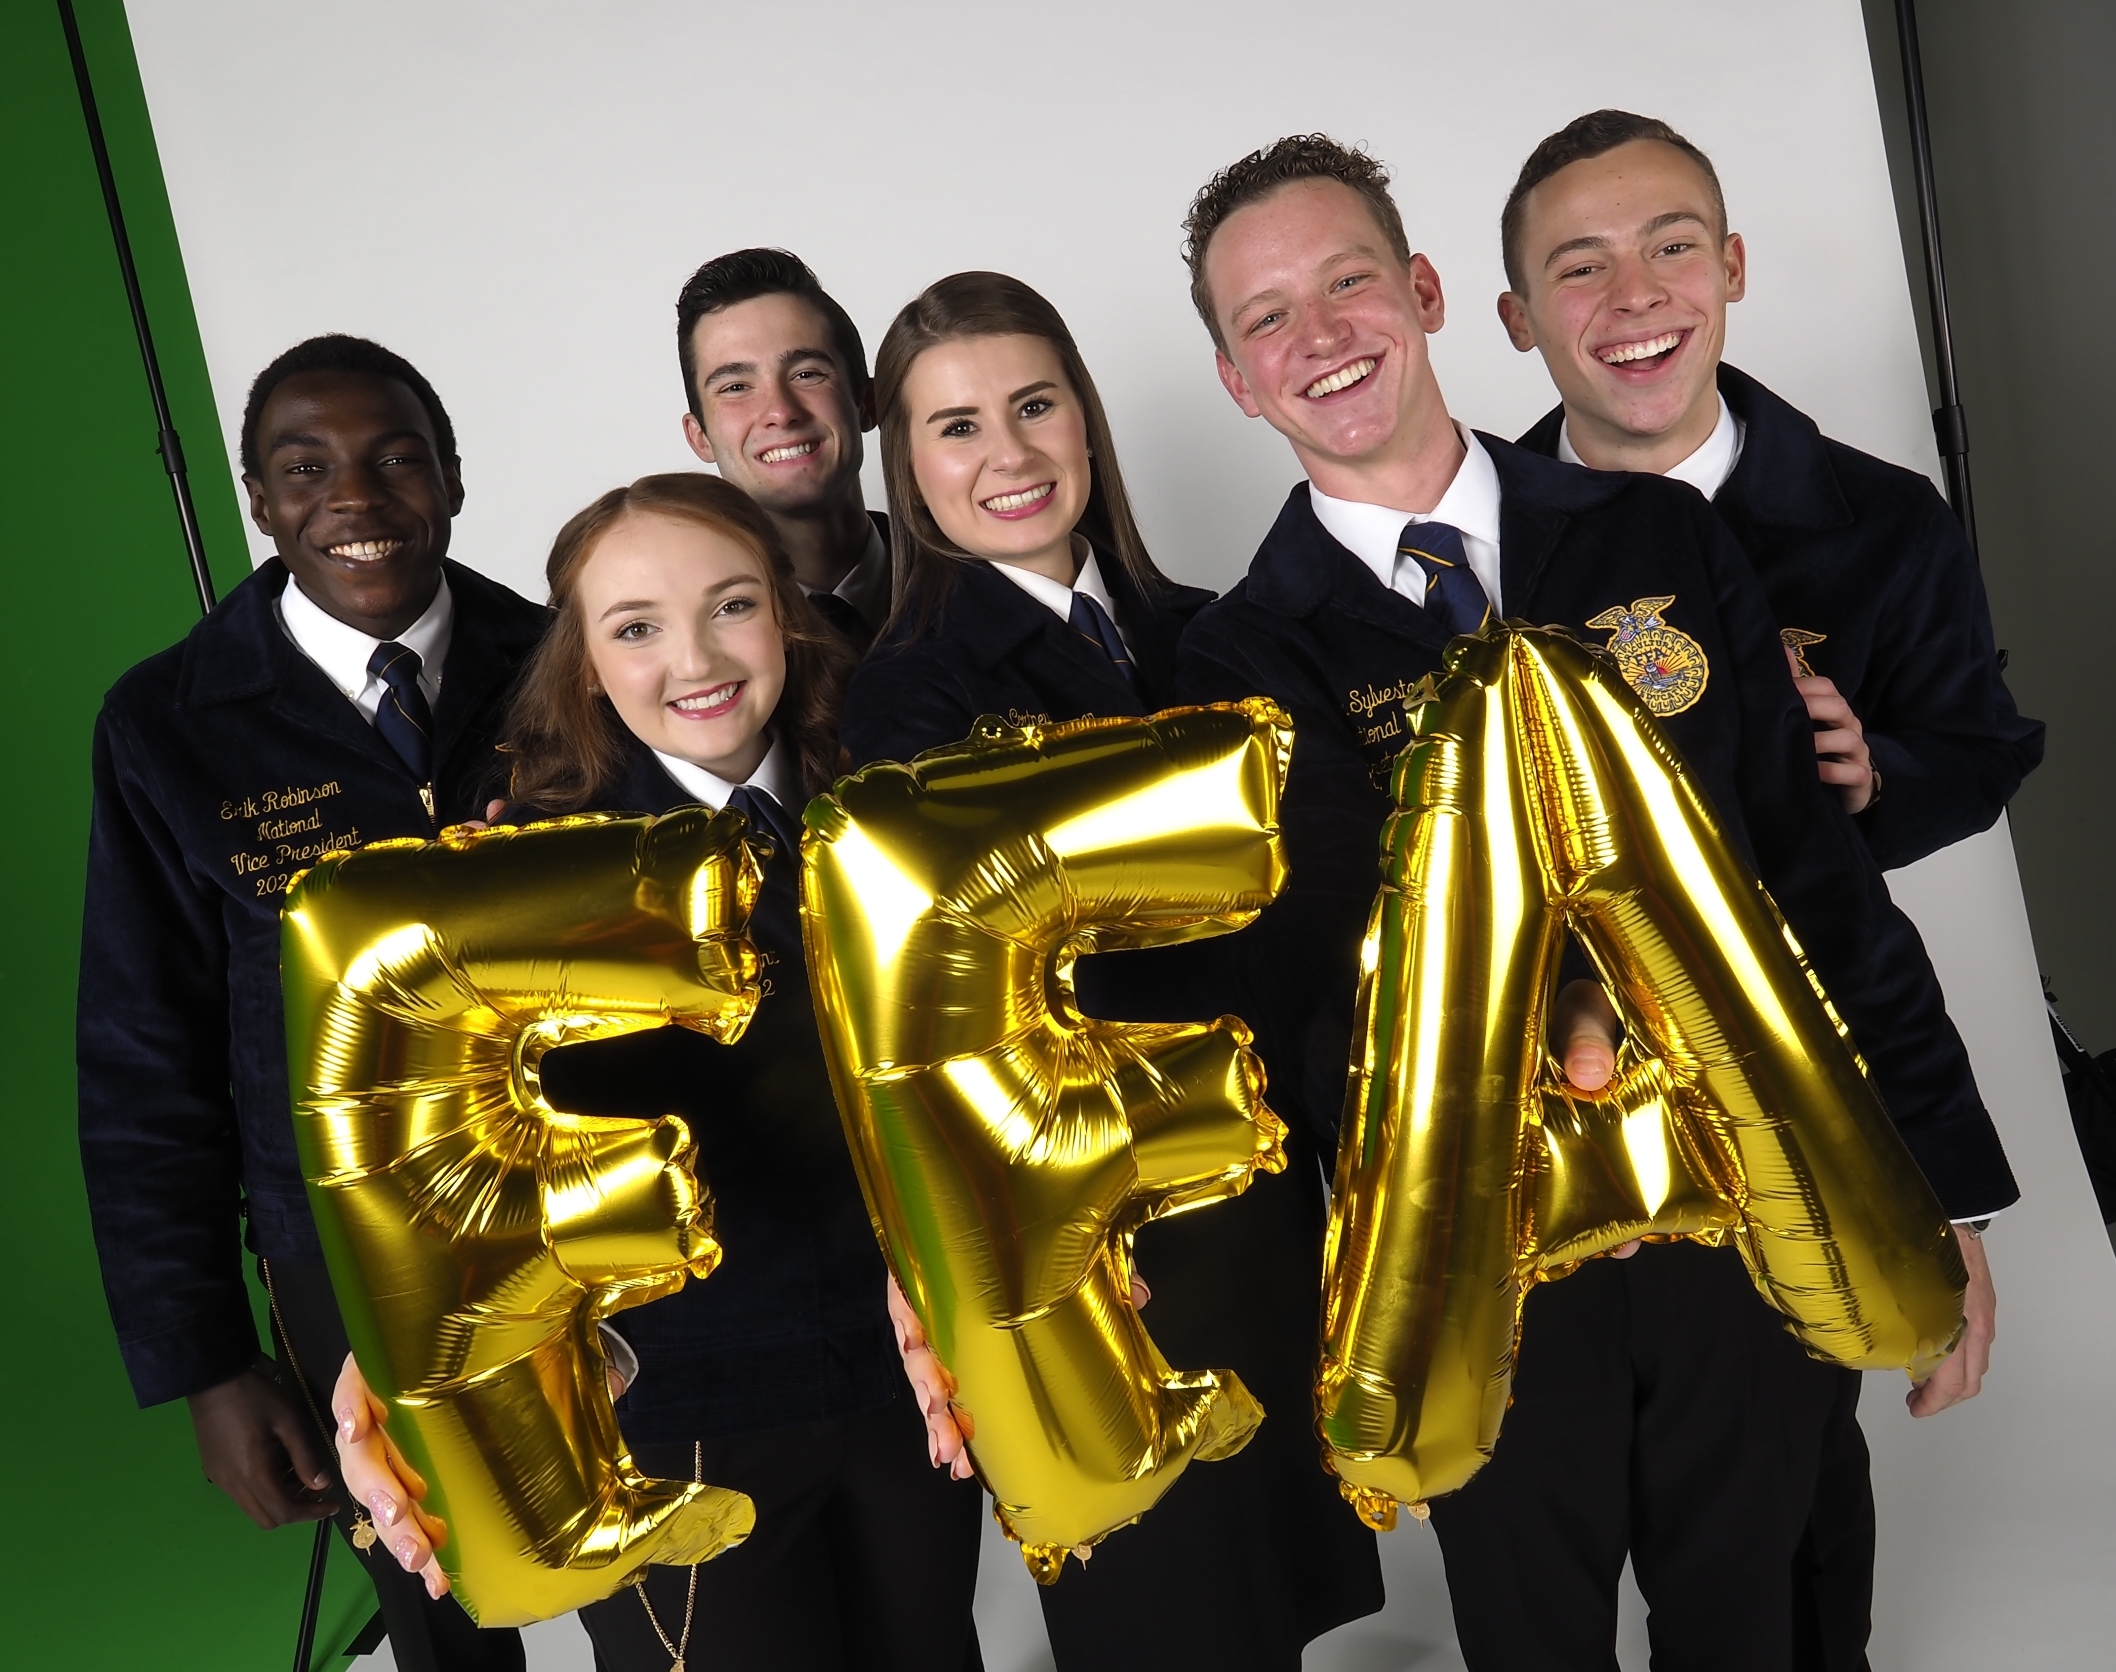 For nearly a century, national blue and corn gold have signified and strengthened the FFA brand.